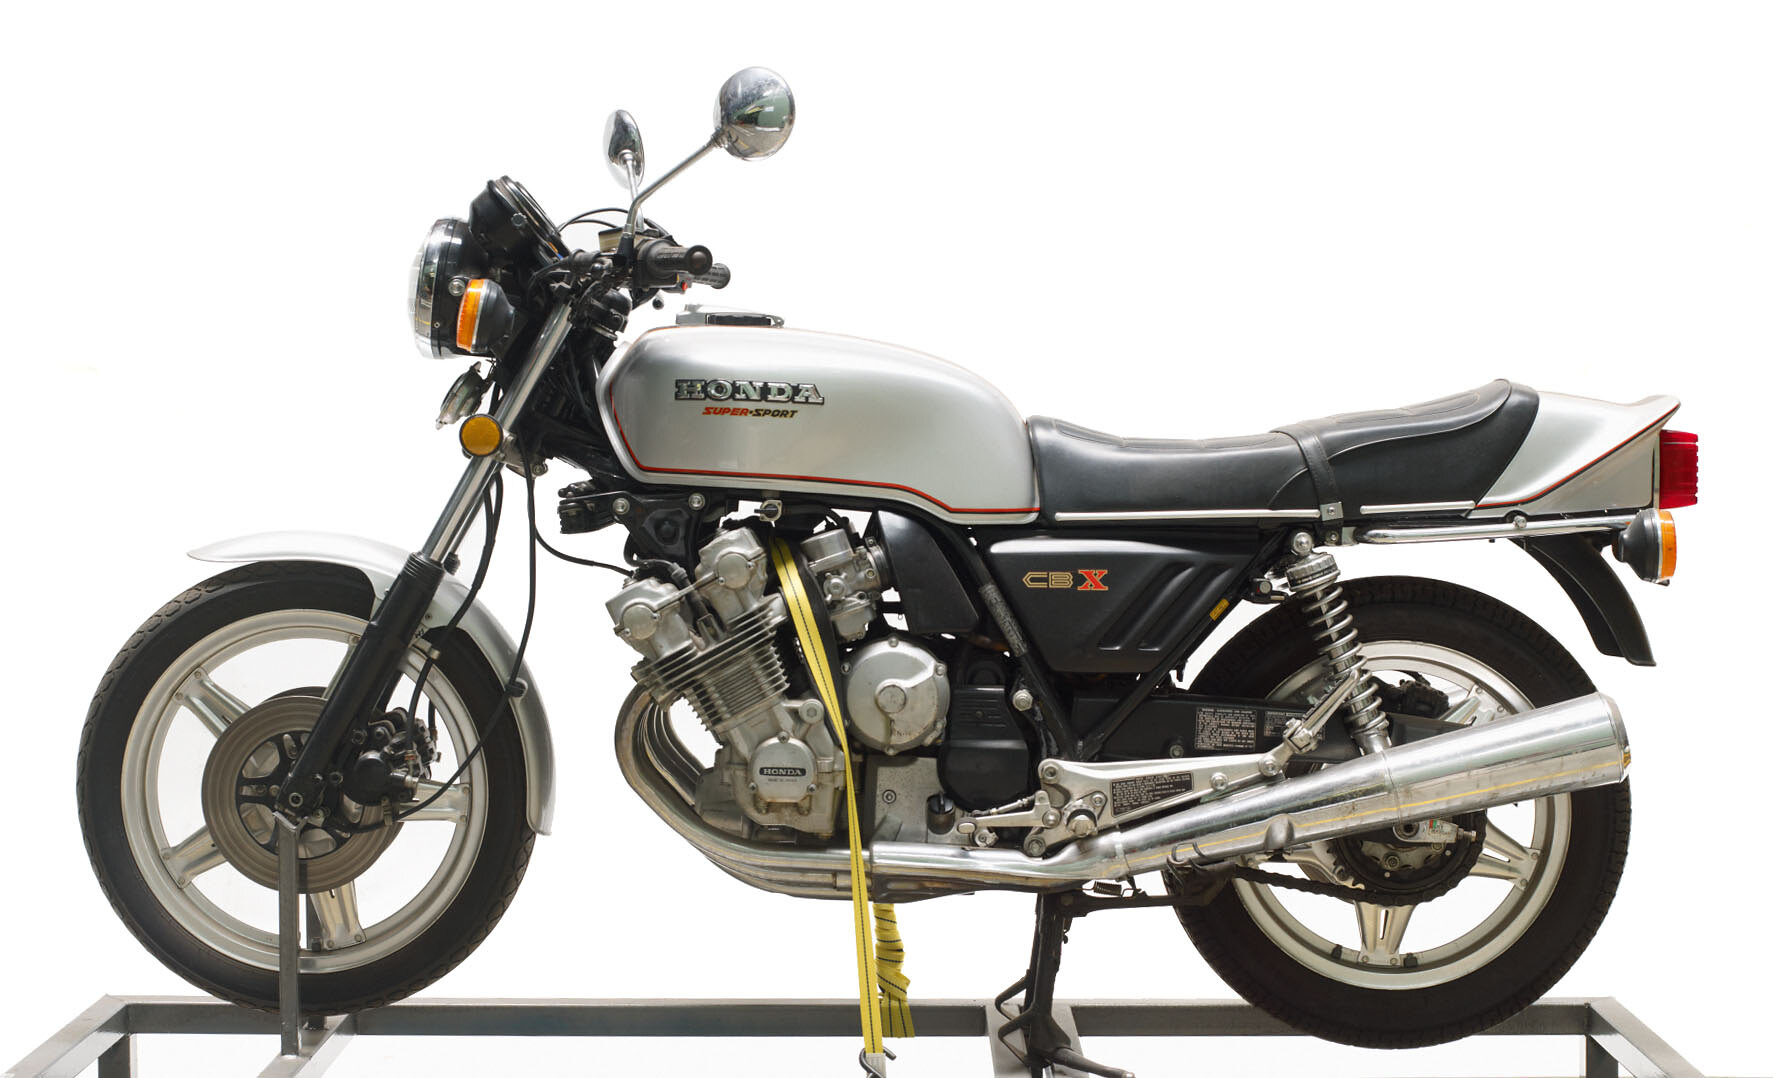 The Honda CBX - An Unusual Japanese Inline-6 Cylinder Motorcycle